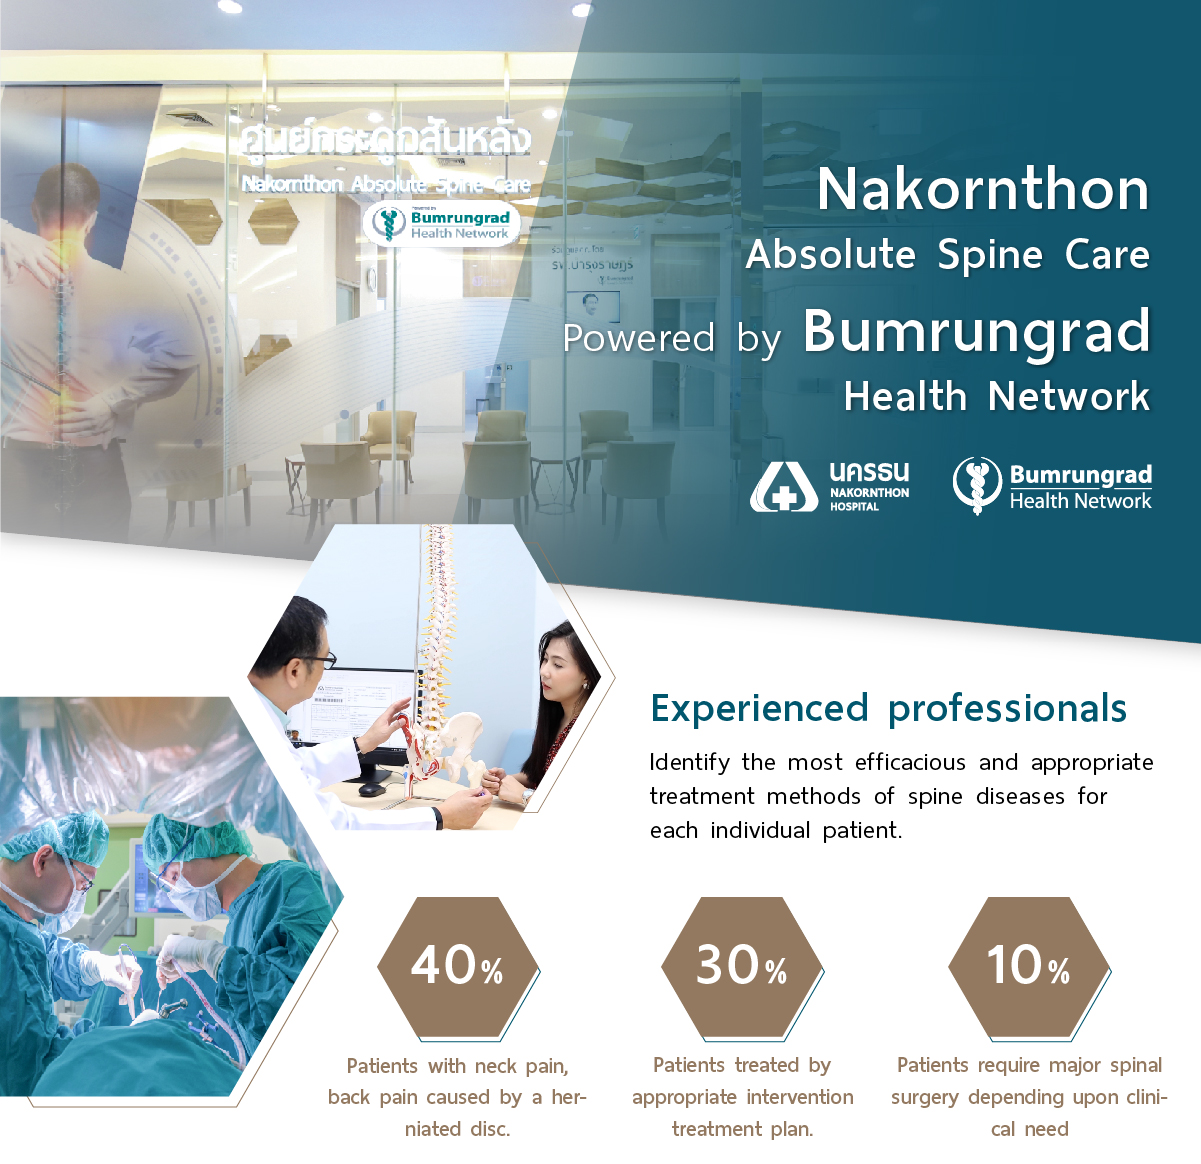 spine center Nakornthon Hospital in Collaboration with Bumrungrad Health Network